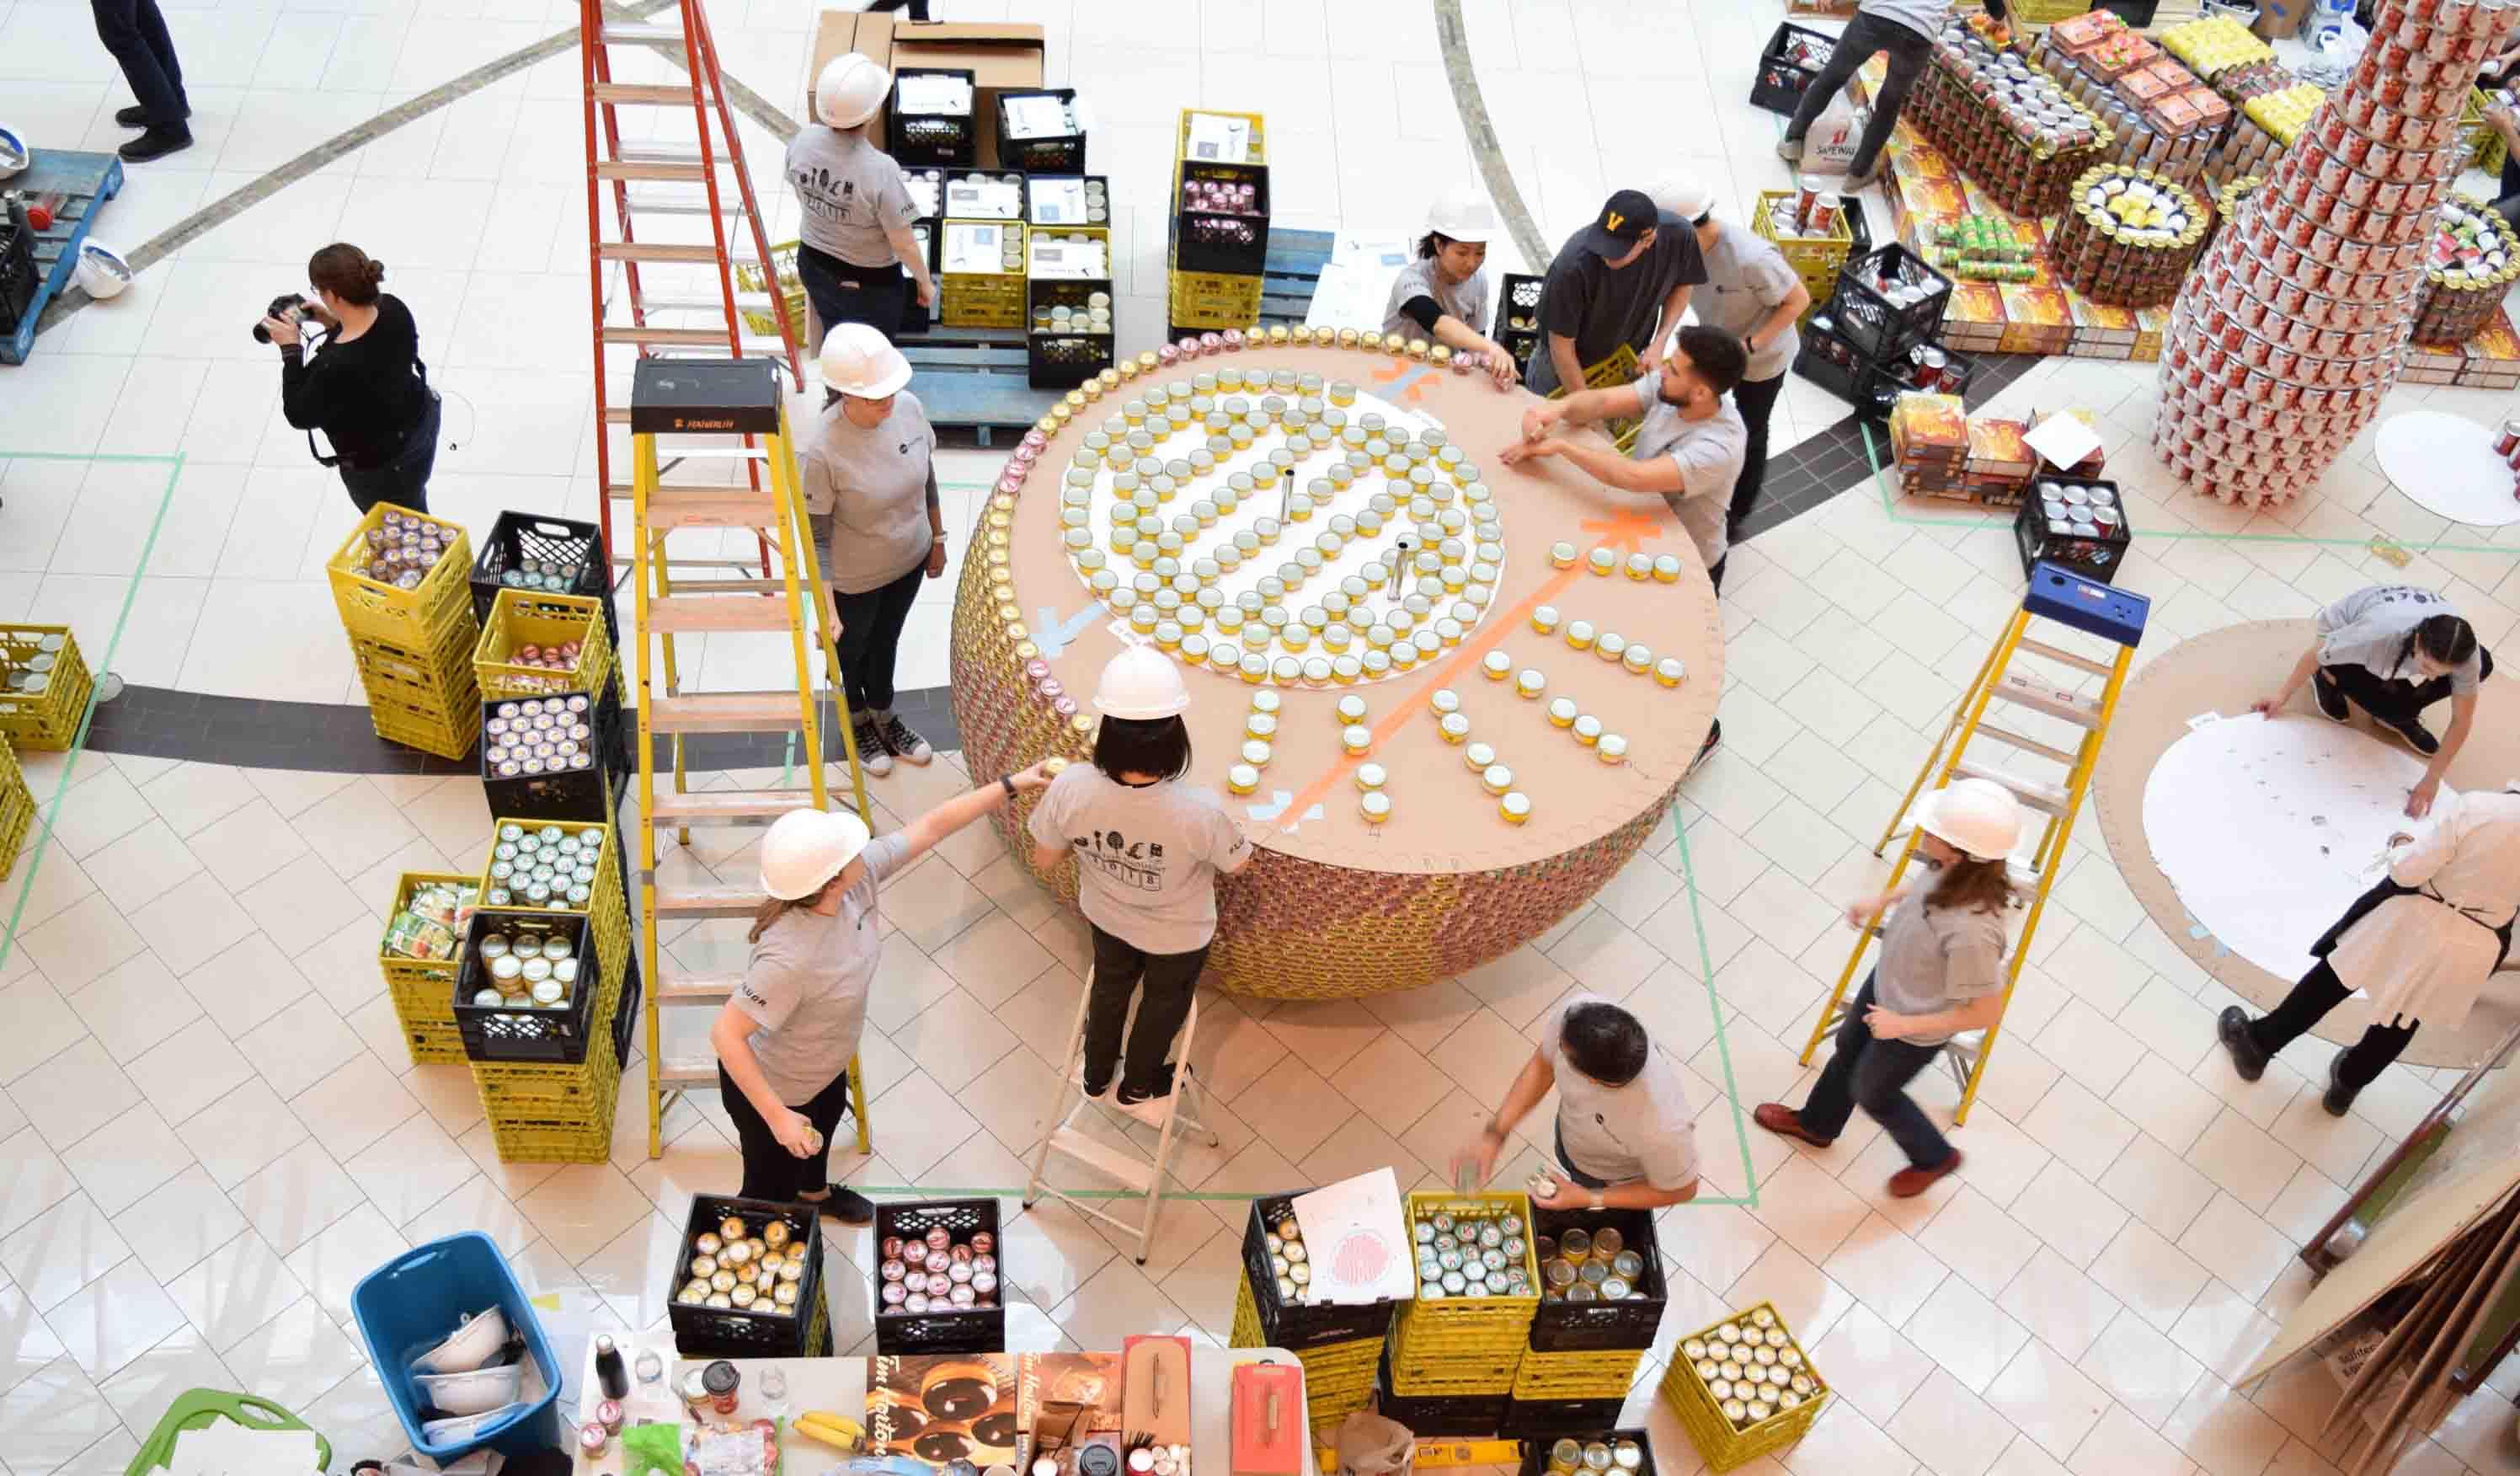 Recreating the largest Easter egg in the world out of cans